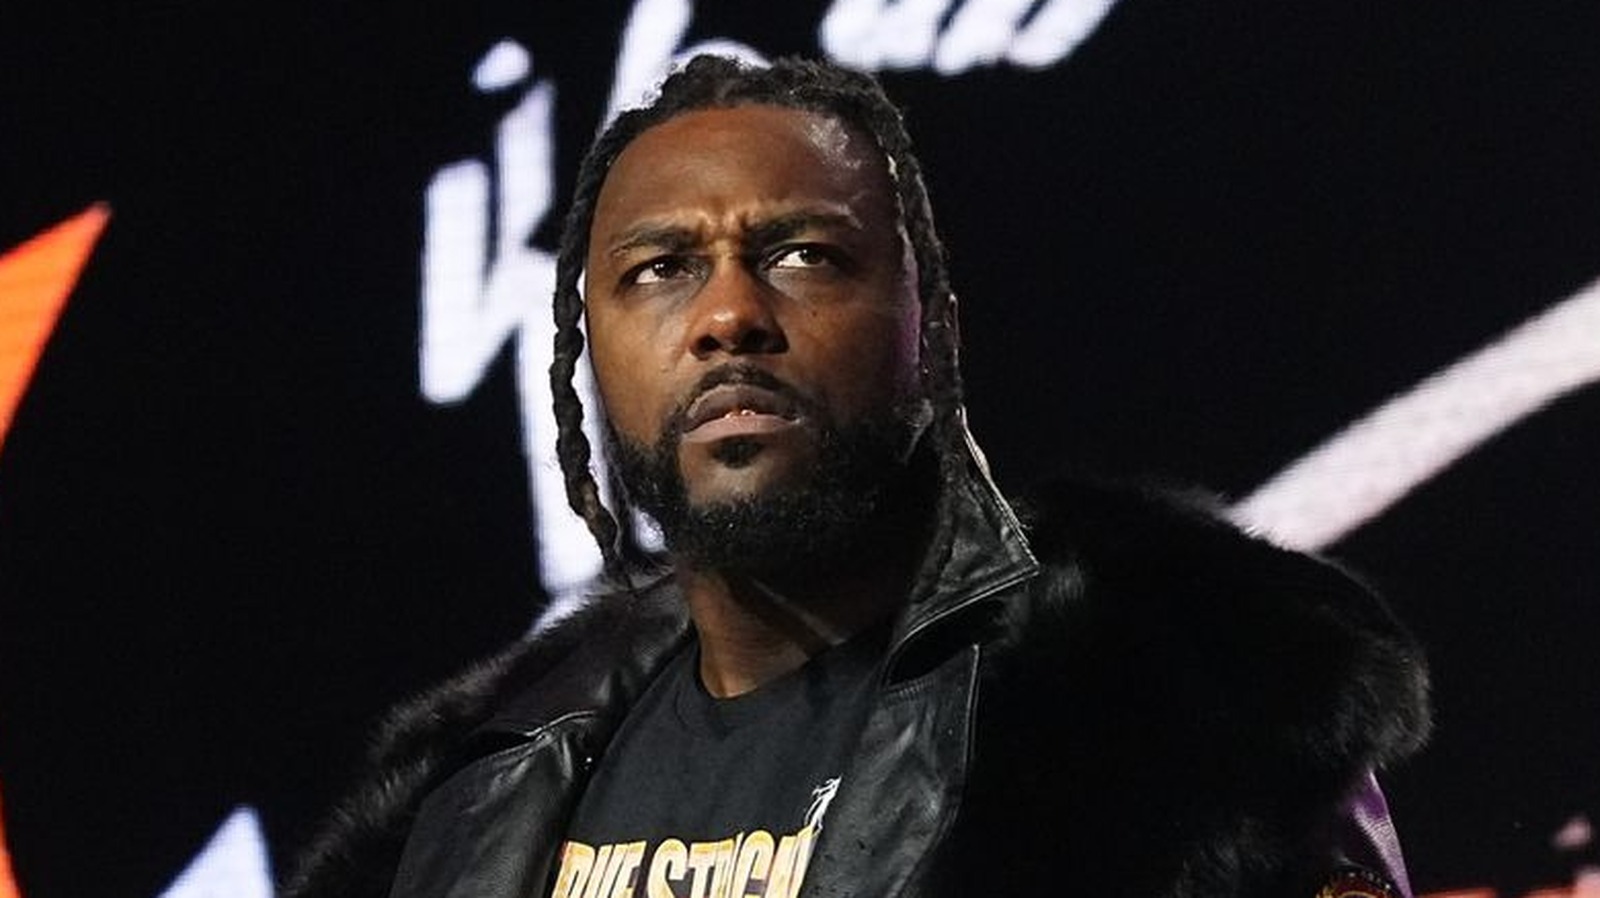 AEW's Swerve Strickland Explains The Different Sides Of His Character